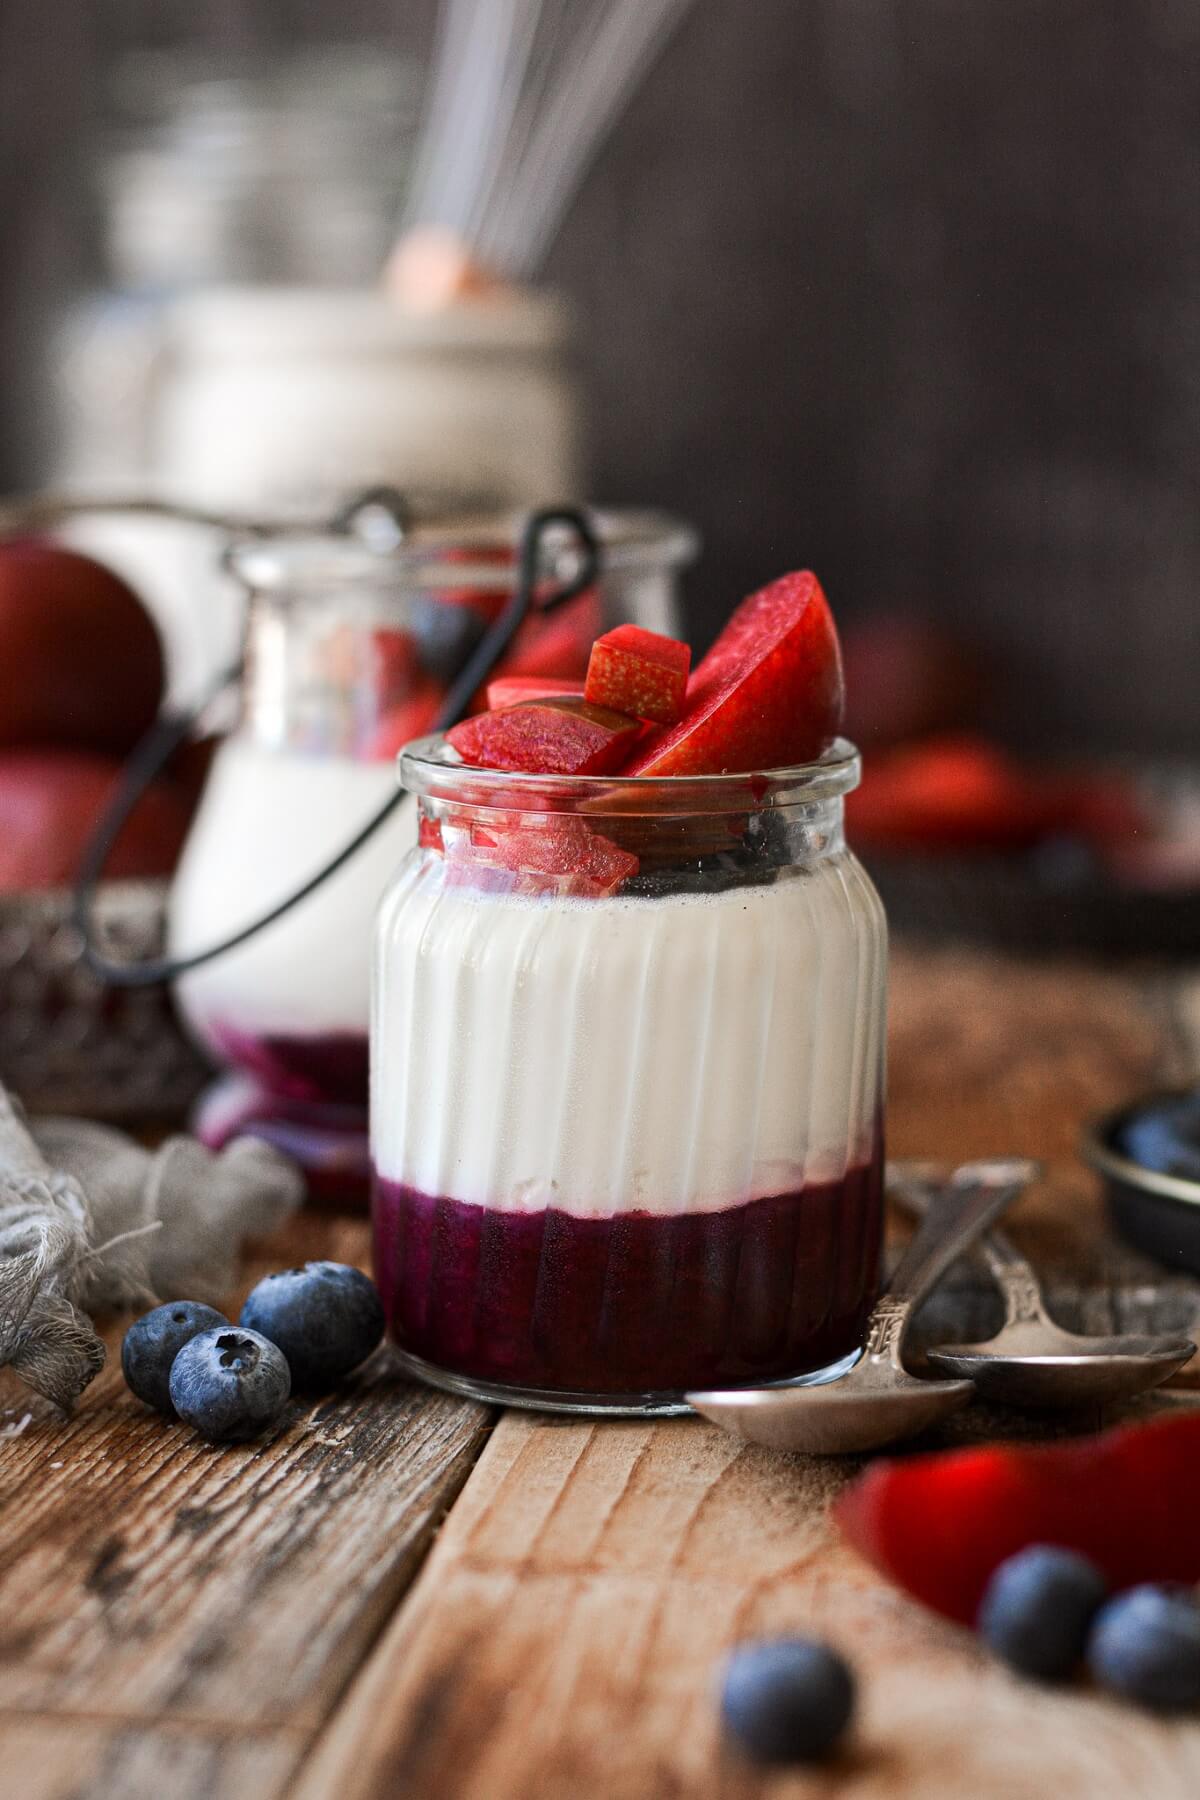 Glass jar filled with layers of fruit compote, white chocolate vanilla bean panna cotta and fresh plums and blueberries.